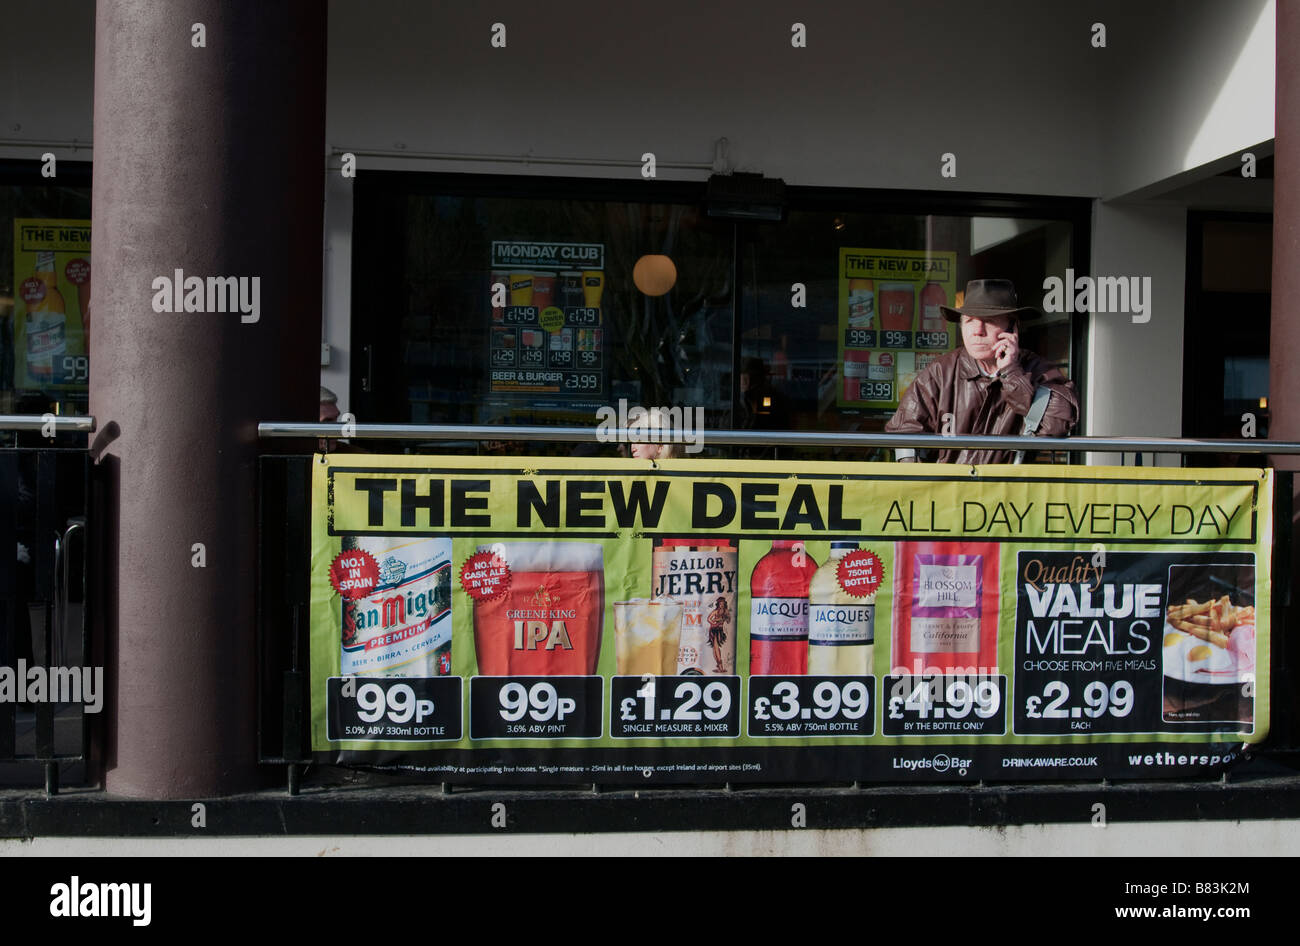 A man in Falmouth, UK on his phone outside a Wetherspoons pub advertising meal and drinks deals. Stock Photo